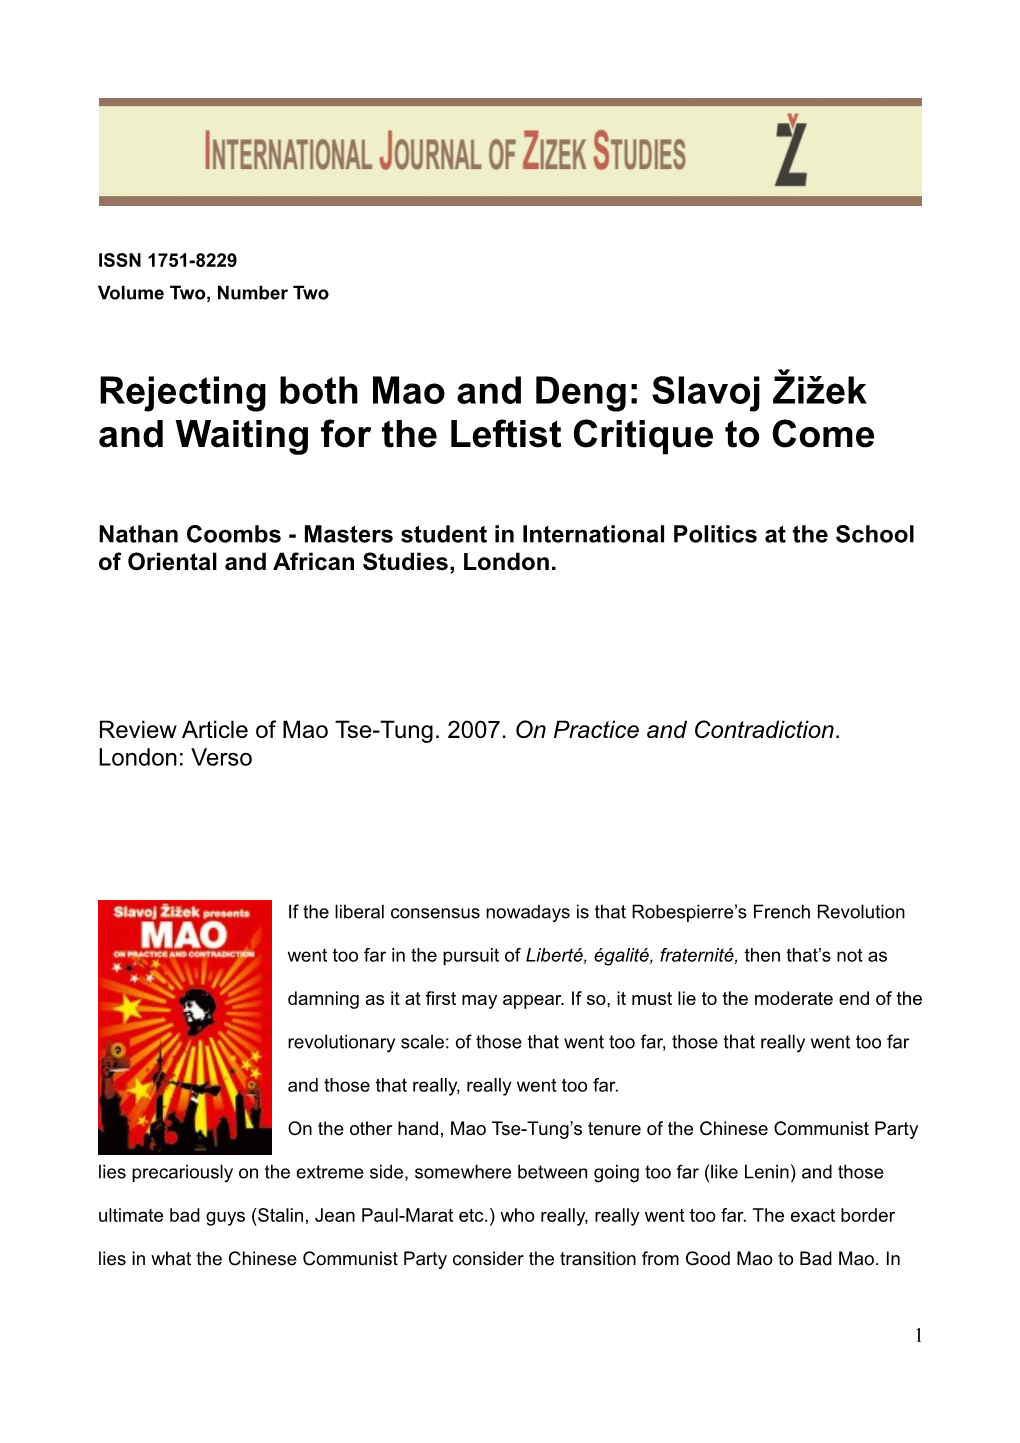 Rejecting Both Mao and Deng: Slavoj Žižek and Waiting for the Leftist Critique to Come